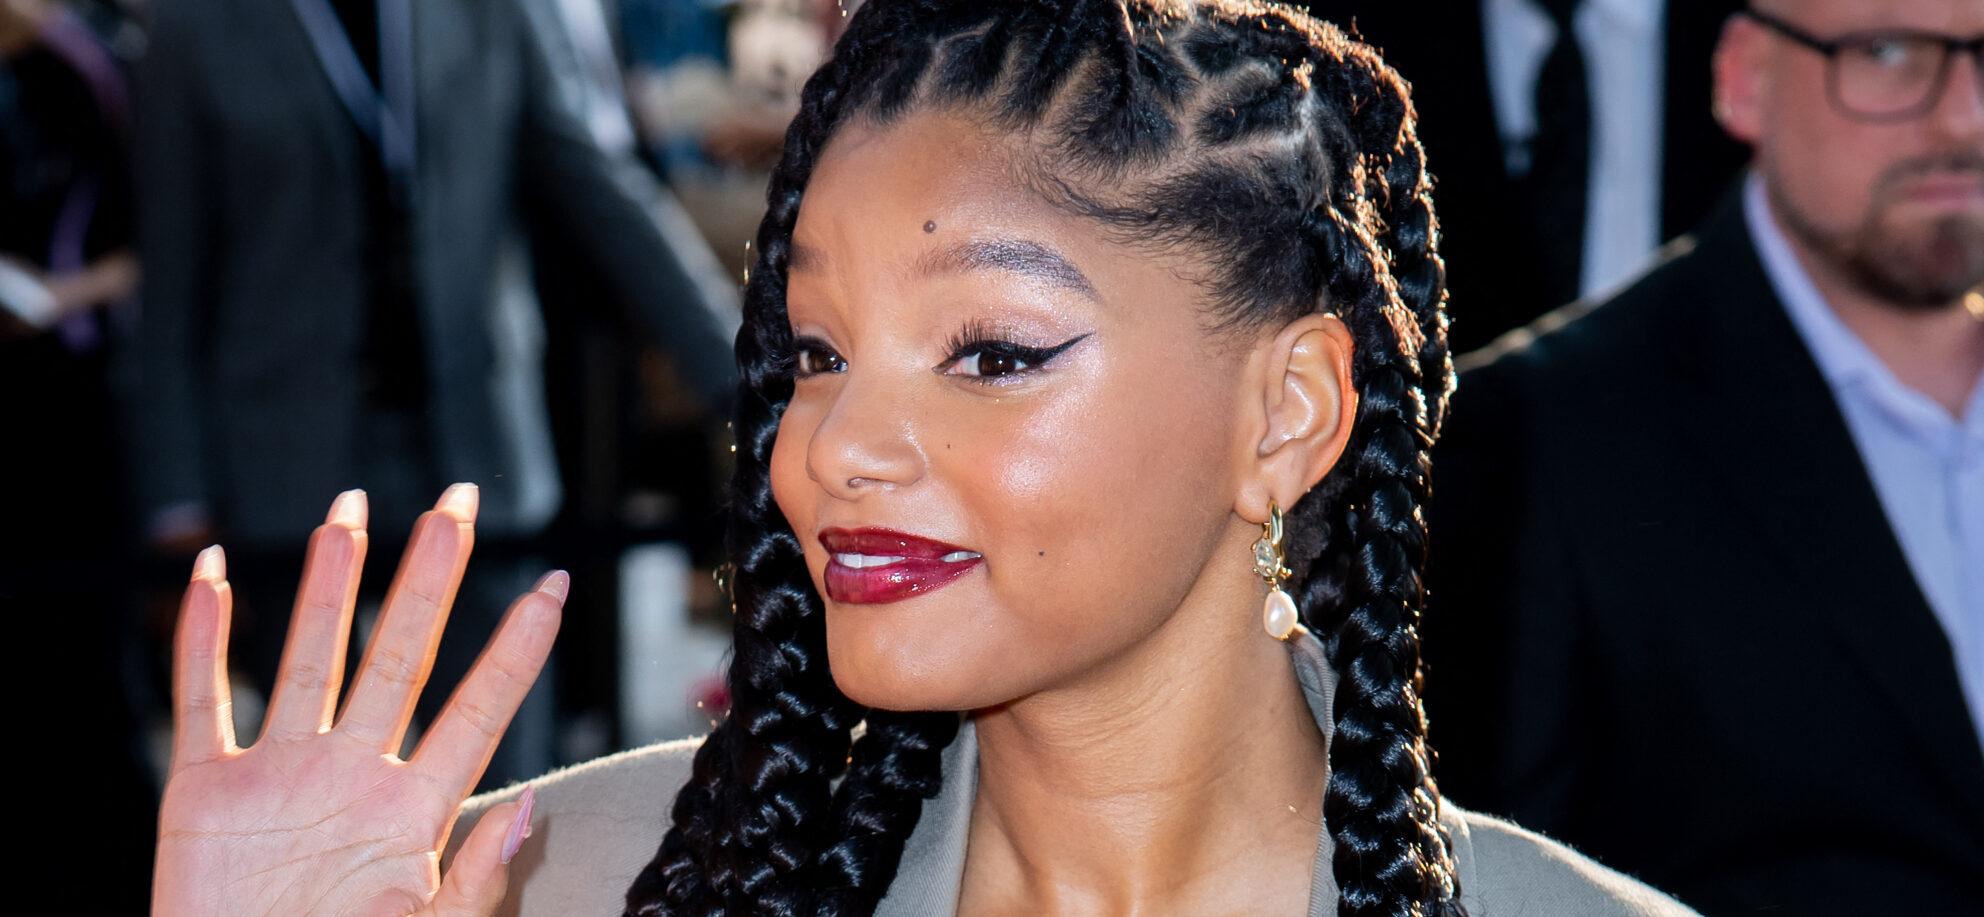 Halle Bailey's Latest Instagram Post Stirs Up Controversy